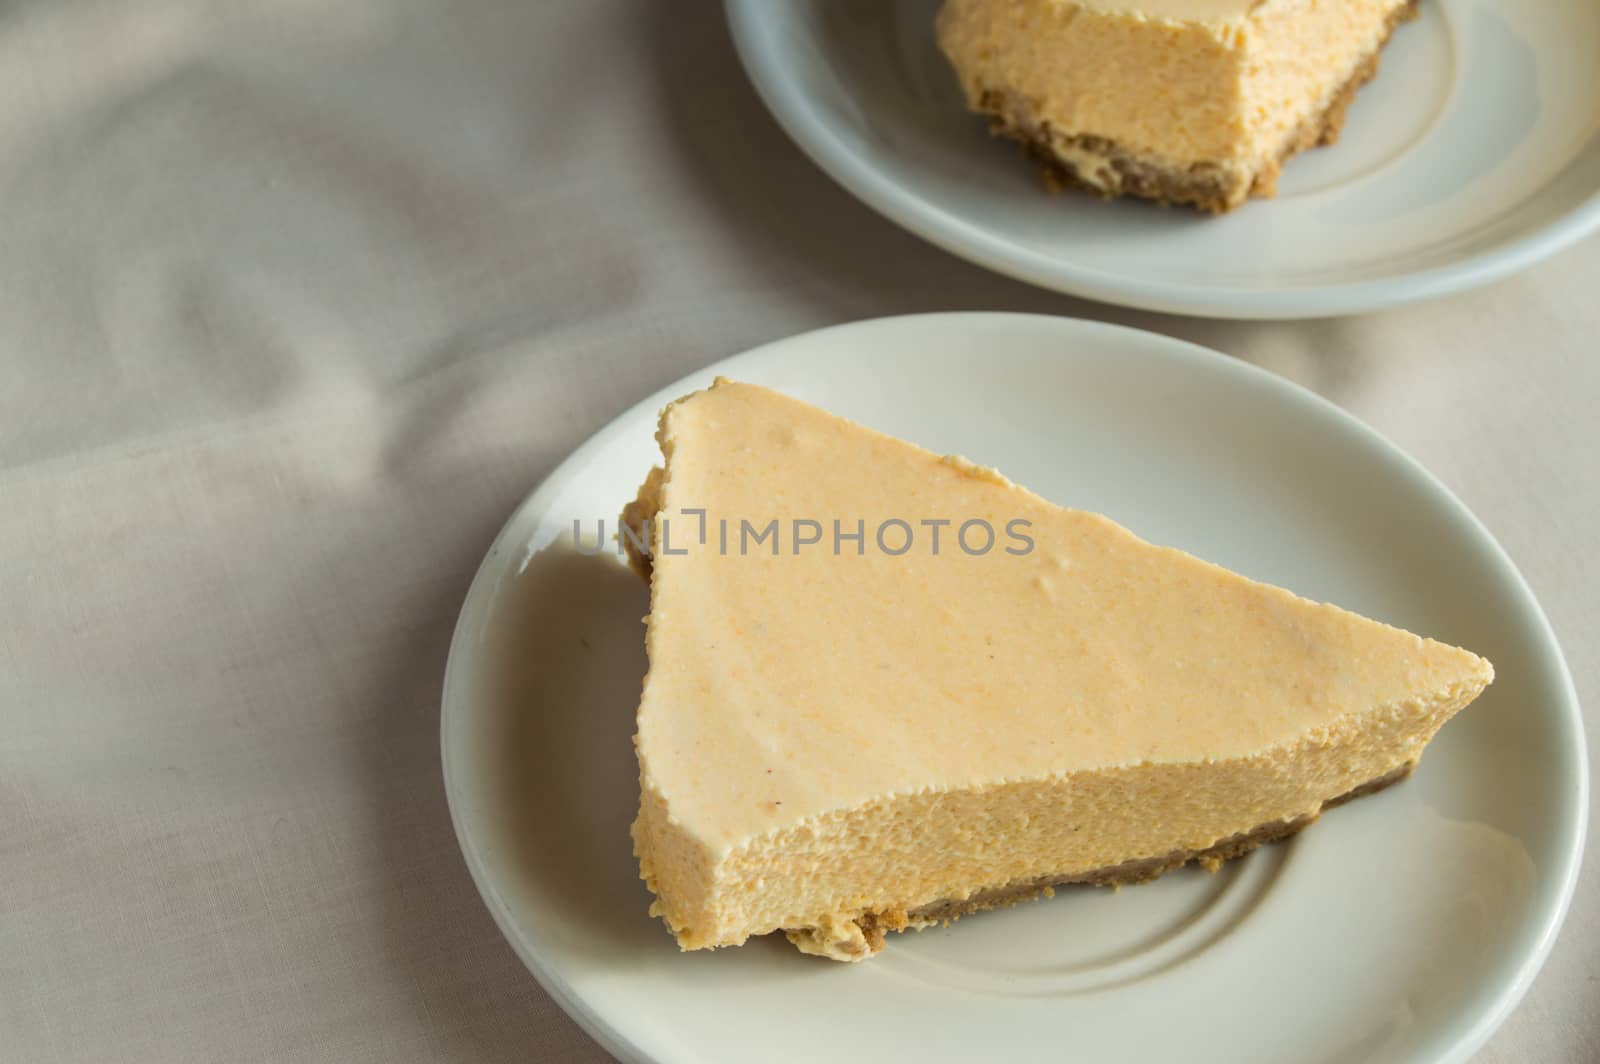 delicious piece of cheesecake on a white plate is on the table with a napkin